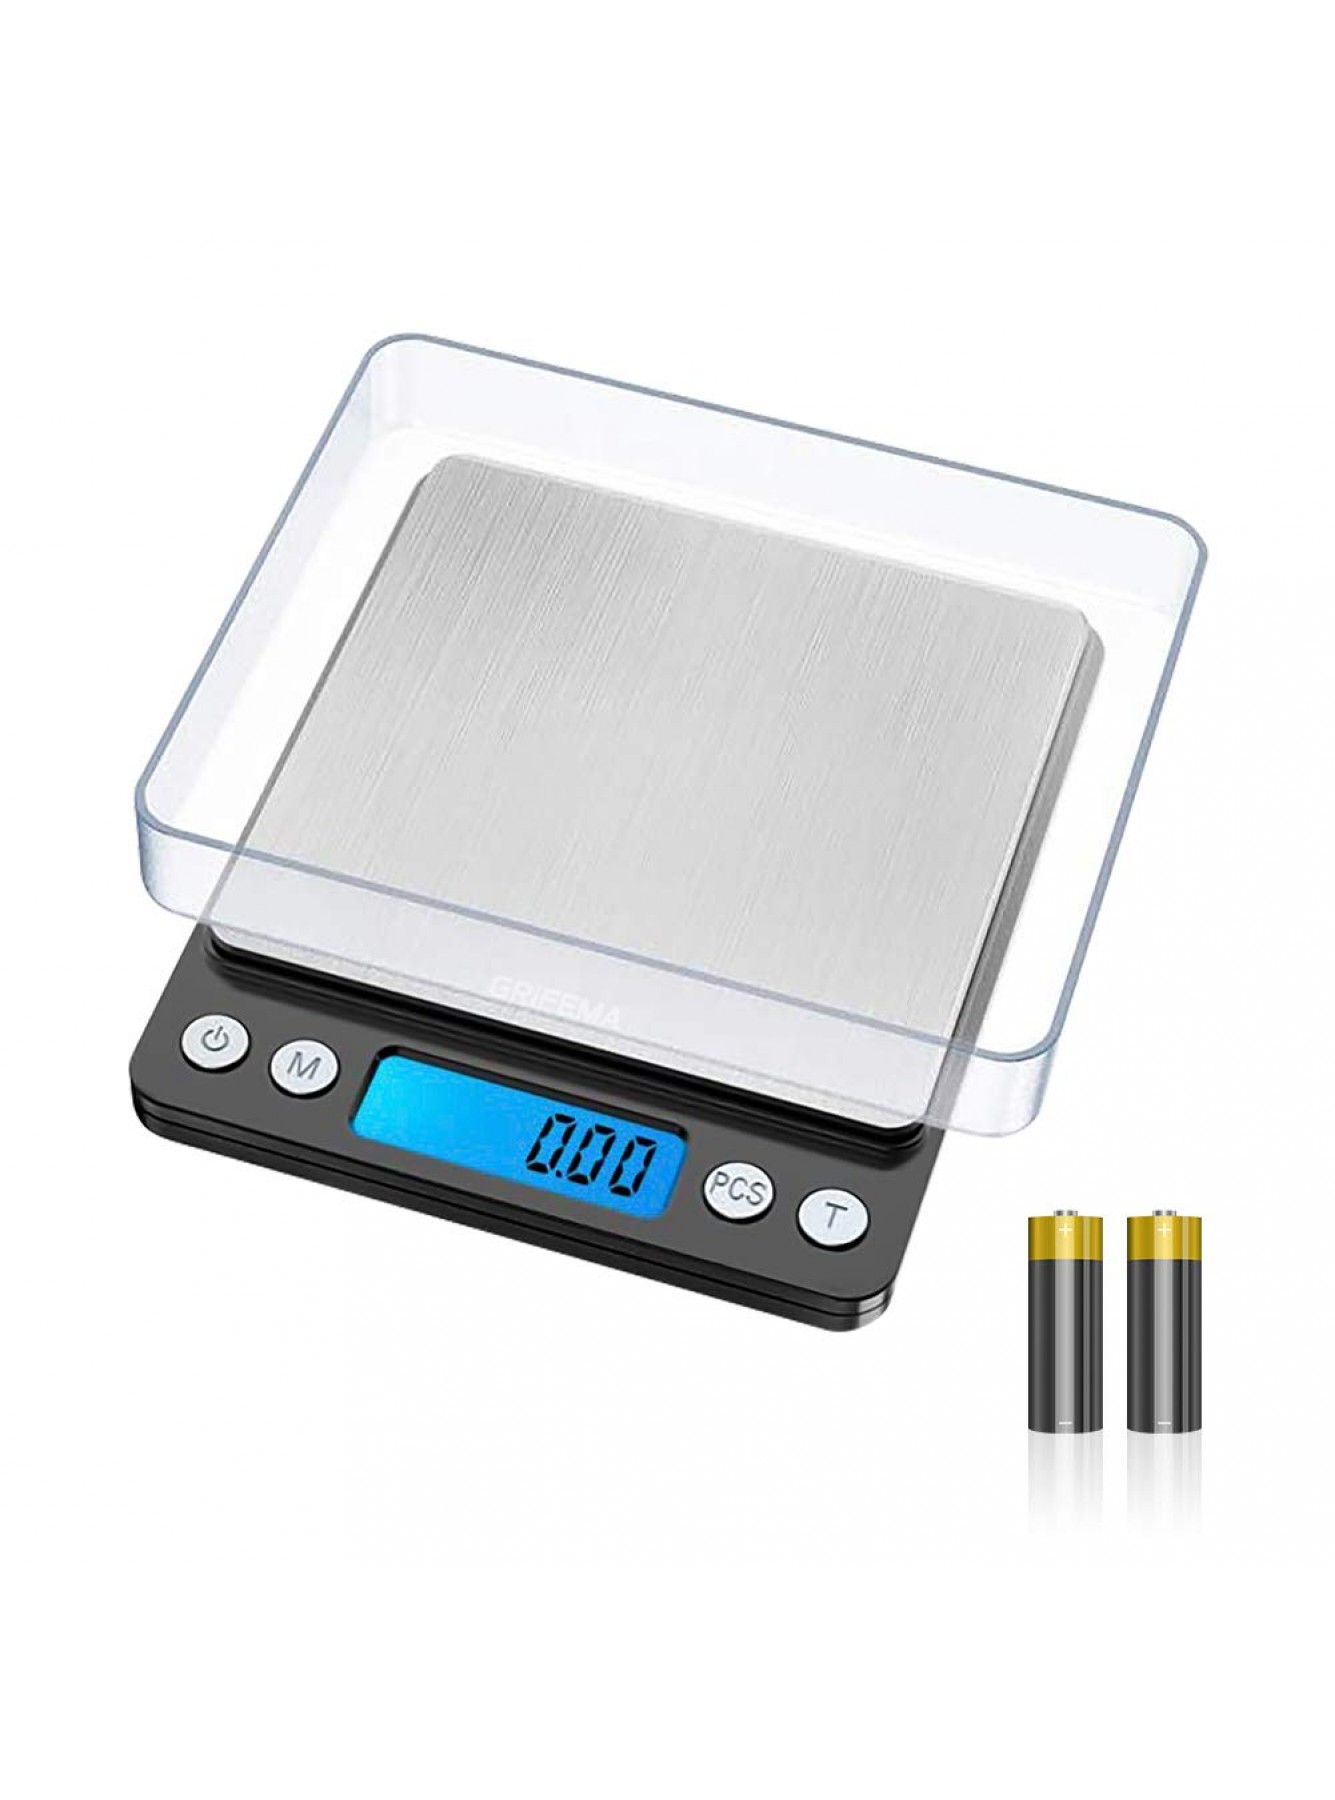 GRIFEMA GA2003 Digital Kitchen Scale with Backlit LCD Display to Easy Read Stainless Steel Tare Function Food Scale 0.01G-500G Weighing Scale with 6 Weighing Units with Tray Batteries Included - KYMPK698